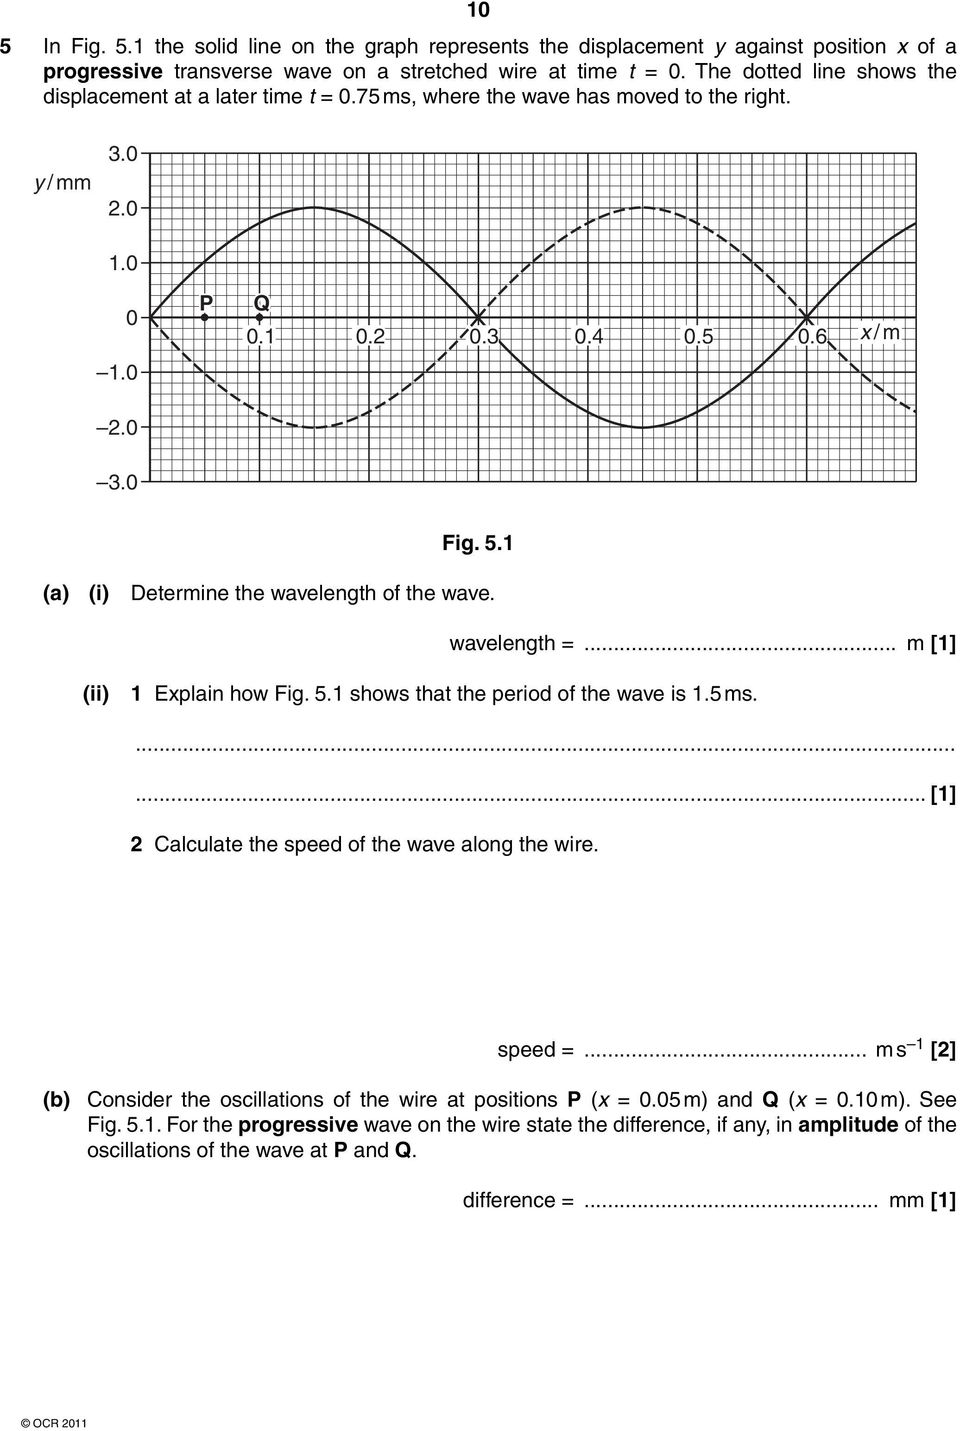 1 (a) (i) Determine the wavelength of the wave. wavelength =... m [1] (ii) 1 Explain how Fig. 5.1 shows that the period of the wave is 1.5 ms.... [1] 2 Calculate the speed of the wave along the wire.